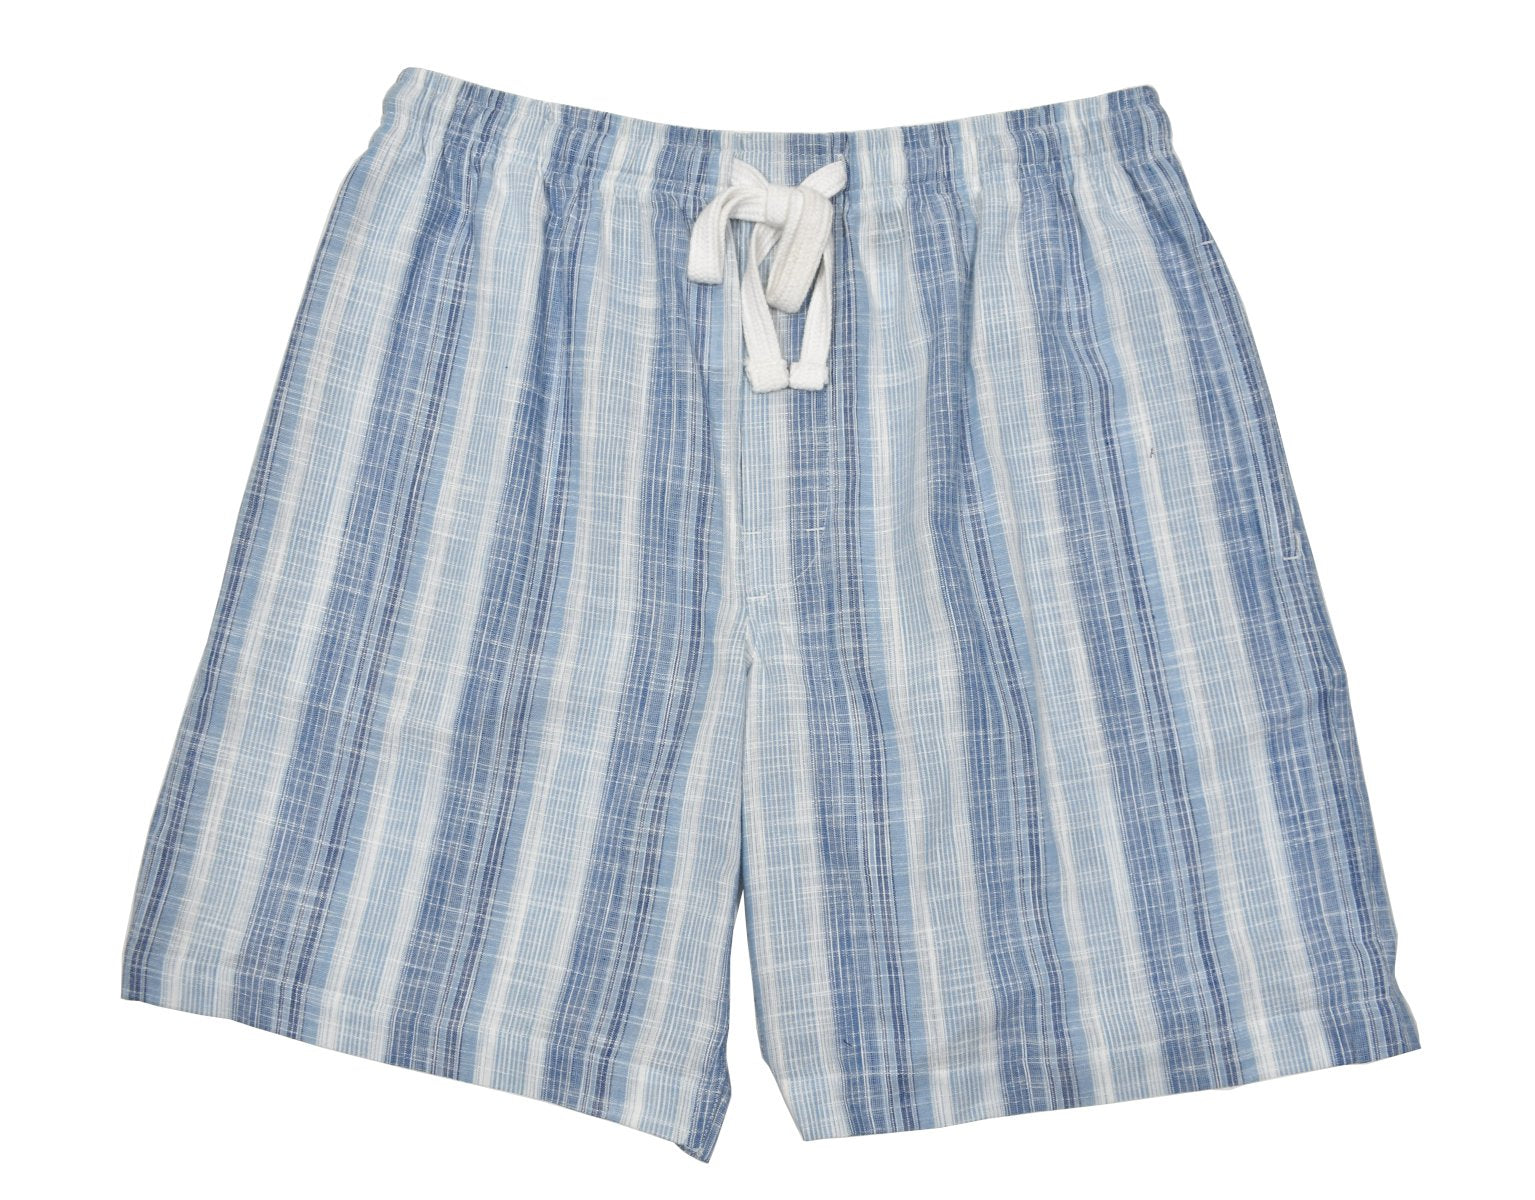 Upgrade your summer style with a cool variated stripe short! Made with a luxurious blend of cotton and microfiber, these shorts offer a comfortable and lightweight fit. The classic stretch waistband and drawstrings ensure the perfect fit, while the linen look adds a fun, sophisticated touch. Complete with convenient side and back pockets, your summer adventures just got a lot more stylish!&nbsp;